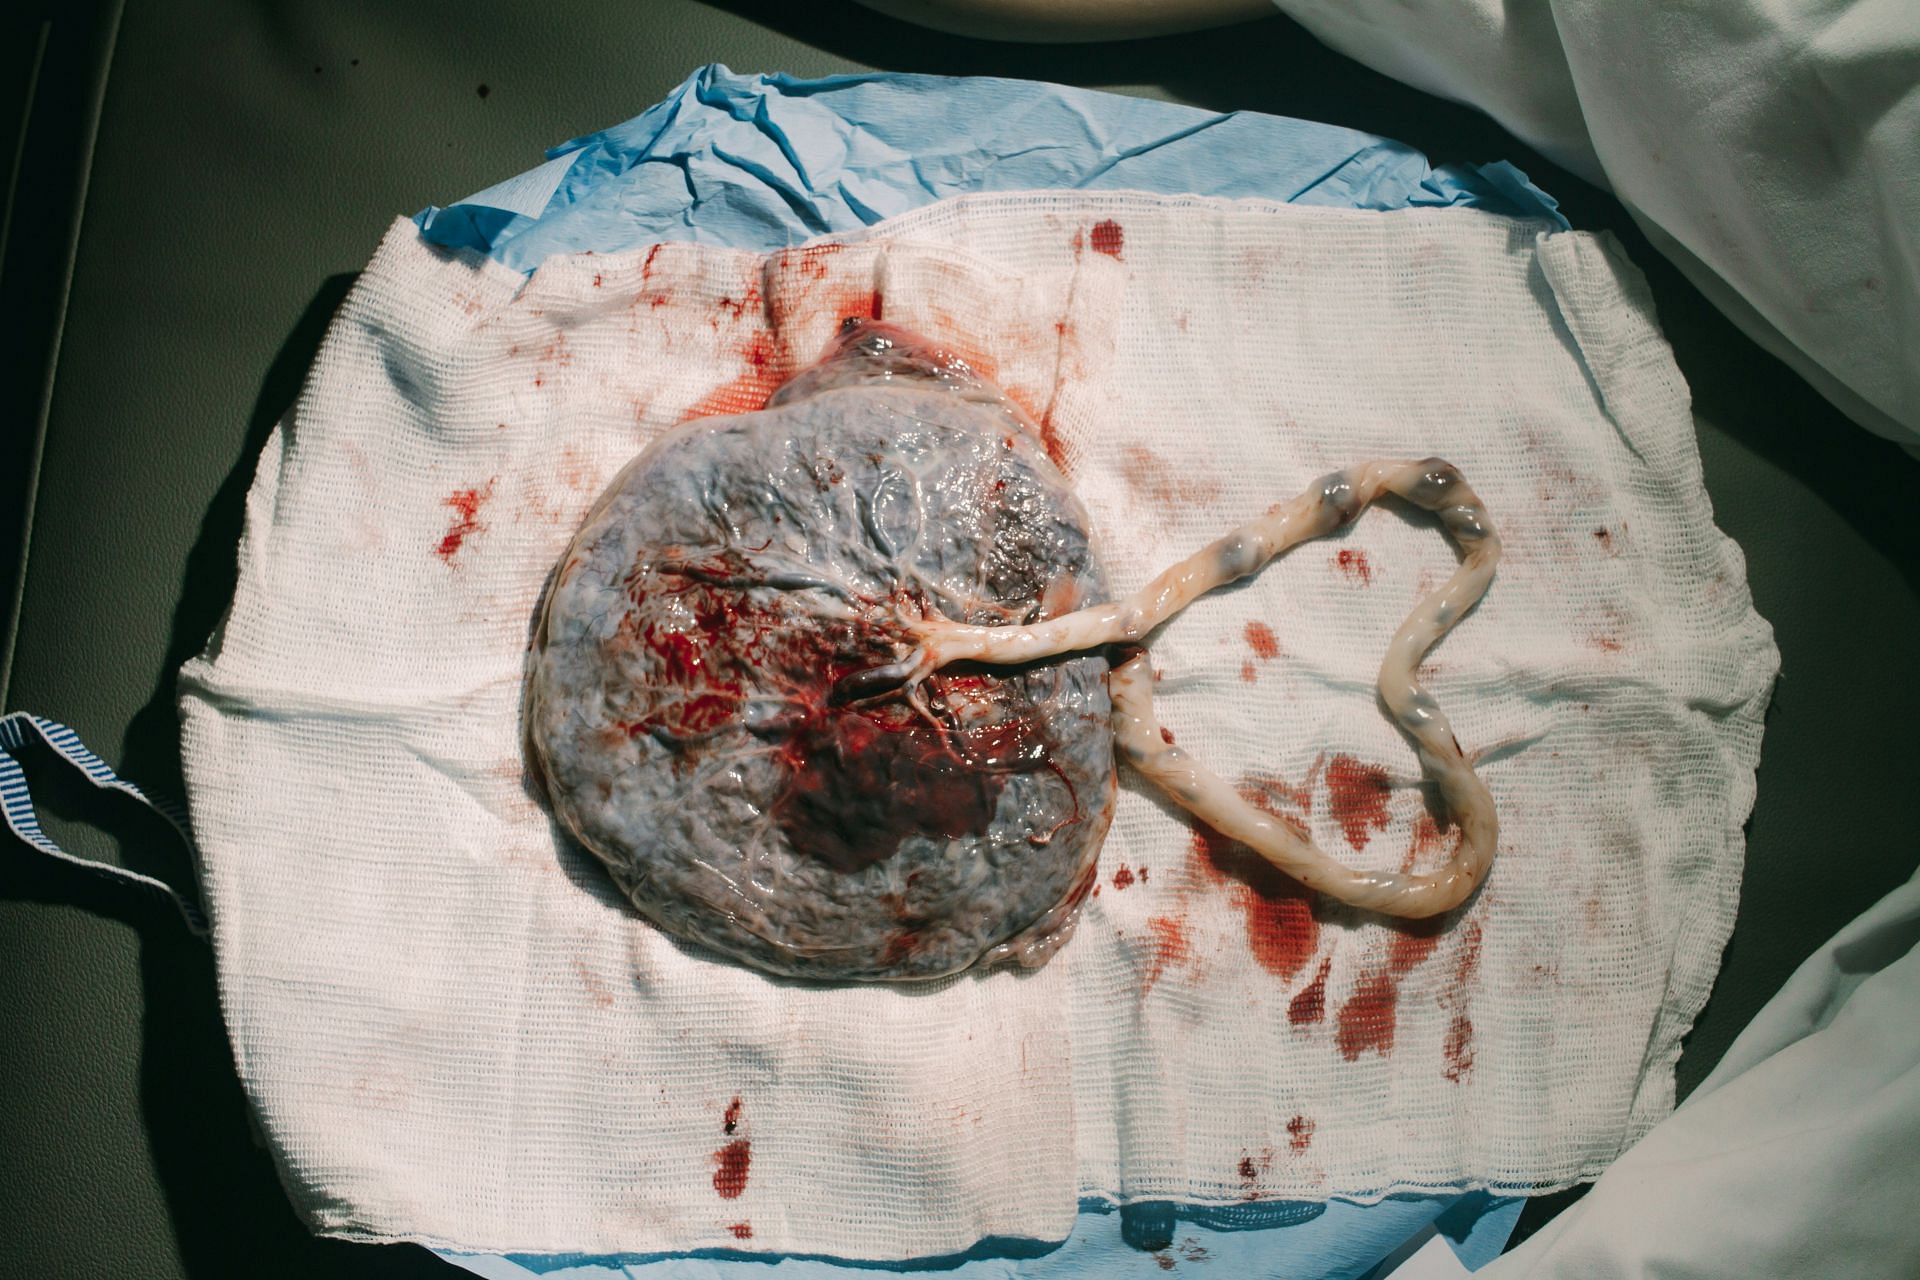 Umbilical hernia is related to the umbilical cord (Image by Joao Paulo De Souza Oliveira/Unsplash)